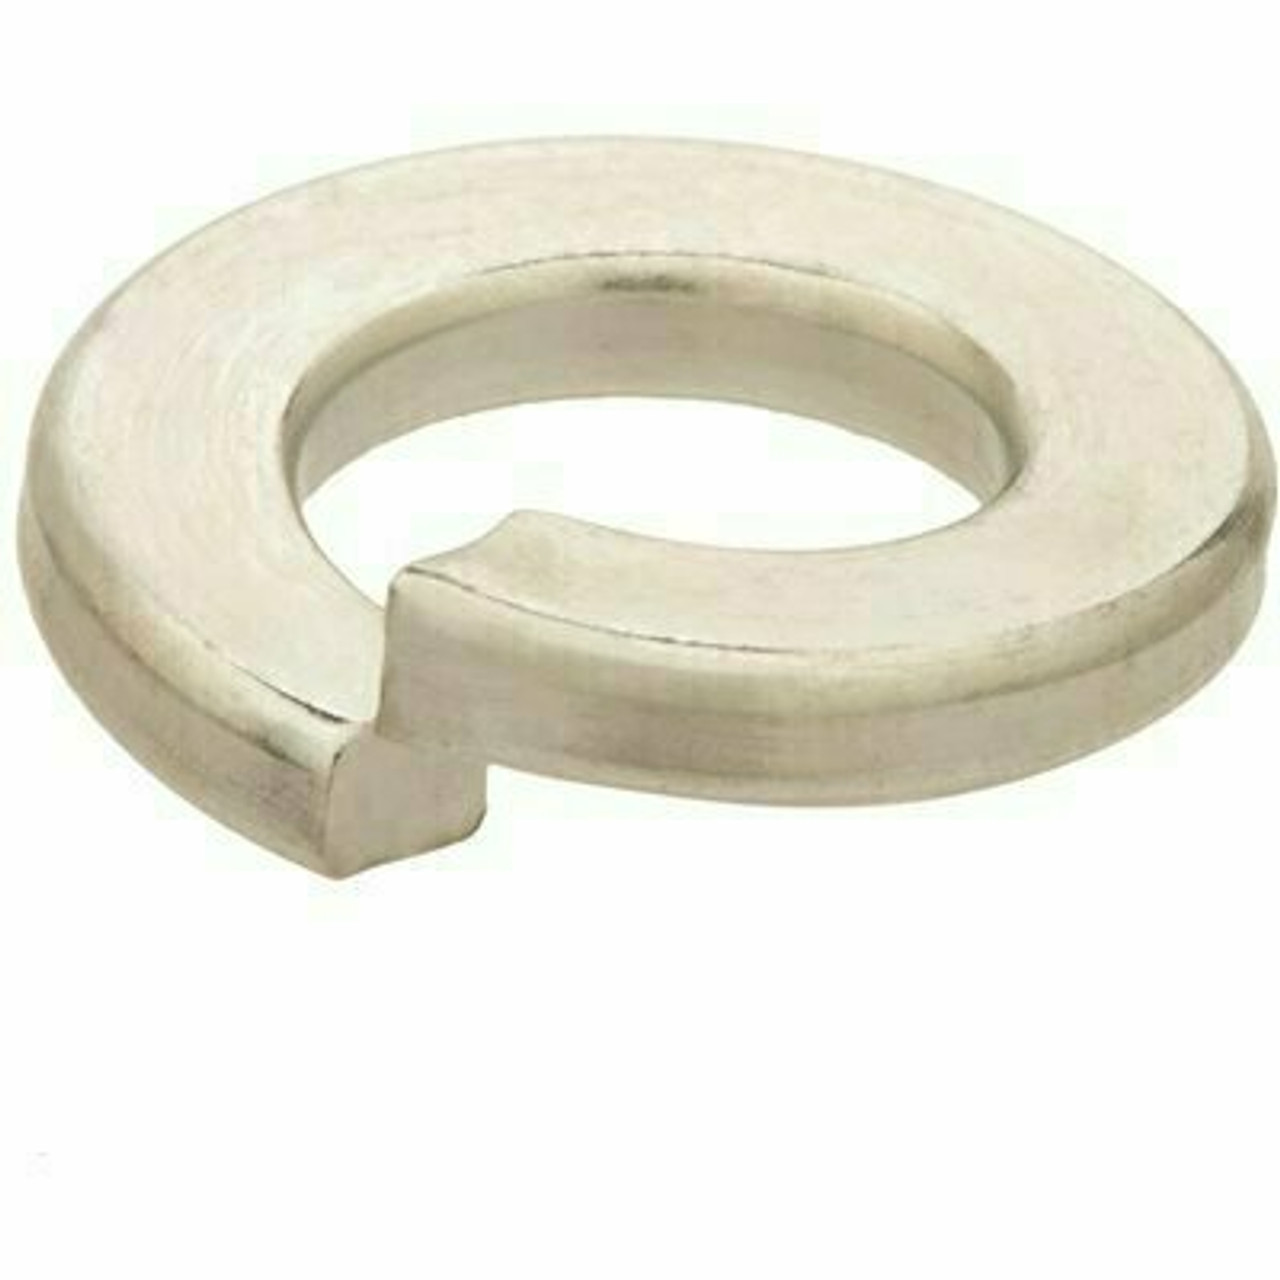 Everbilt 1/2 In. Zinc Plated Lock Washer (100-Pack)